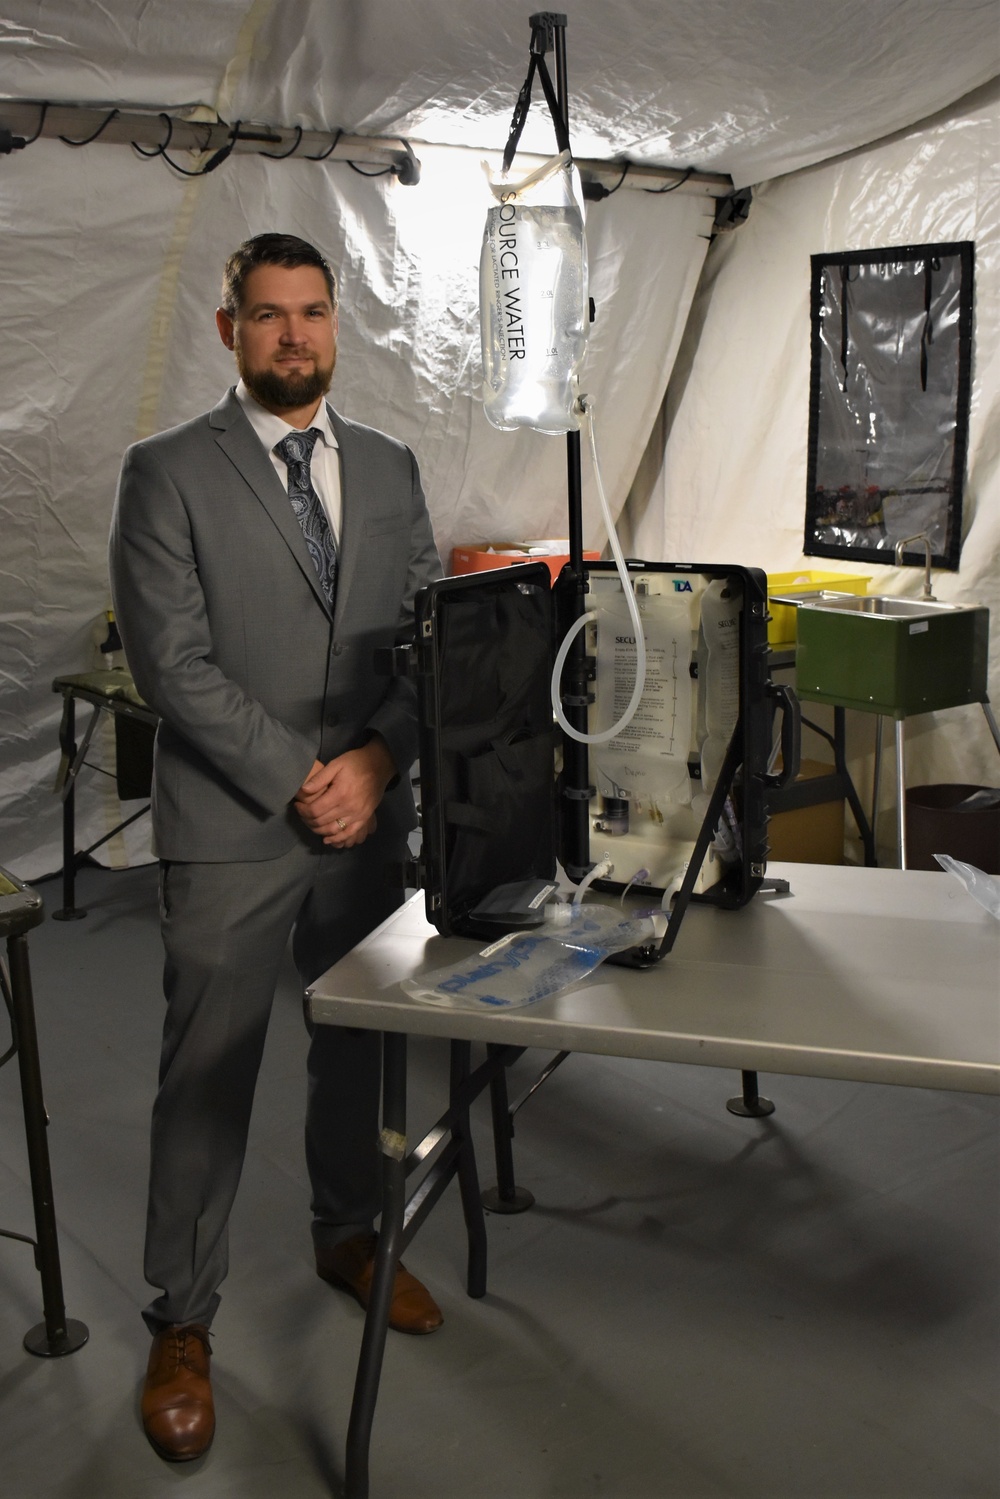 New Medical Device May Change the Face of Battlefield Treatment